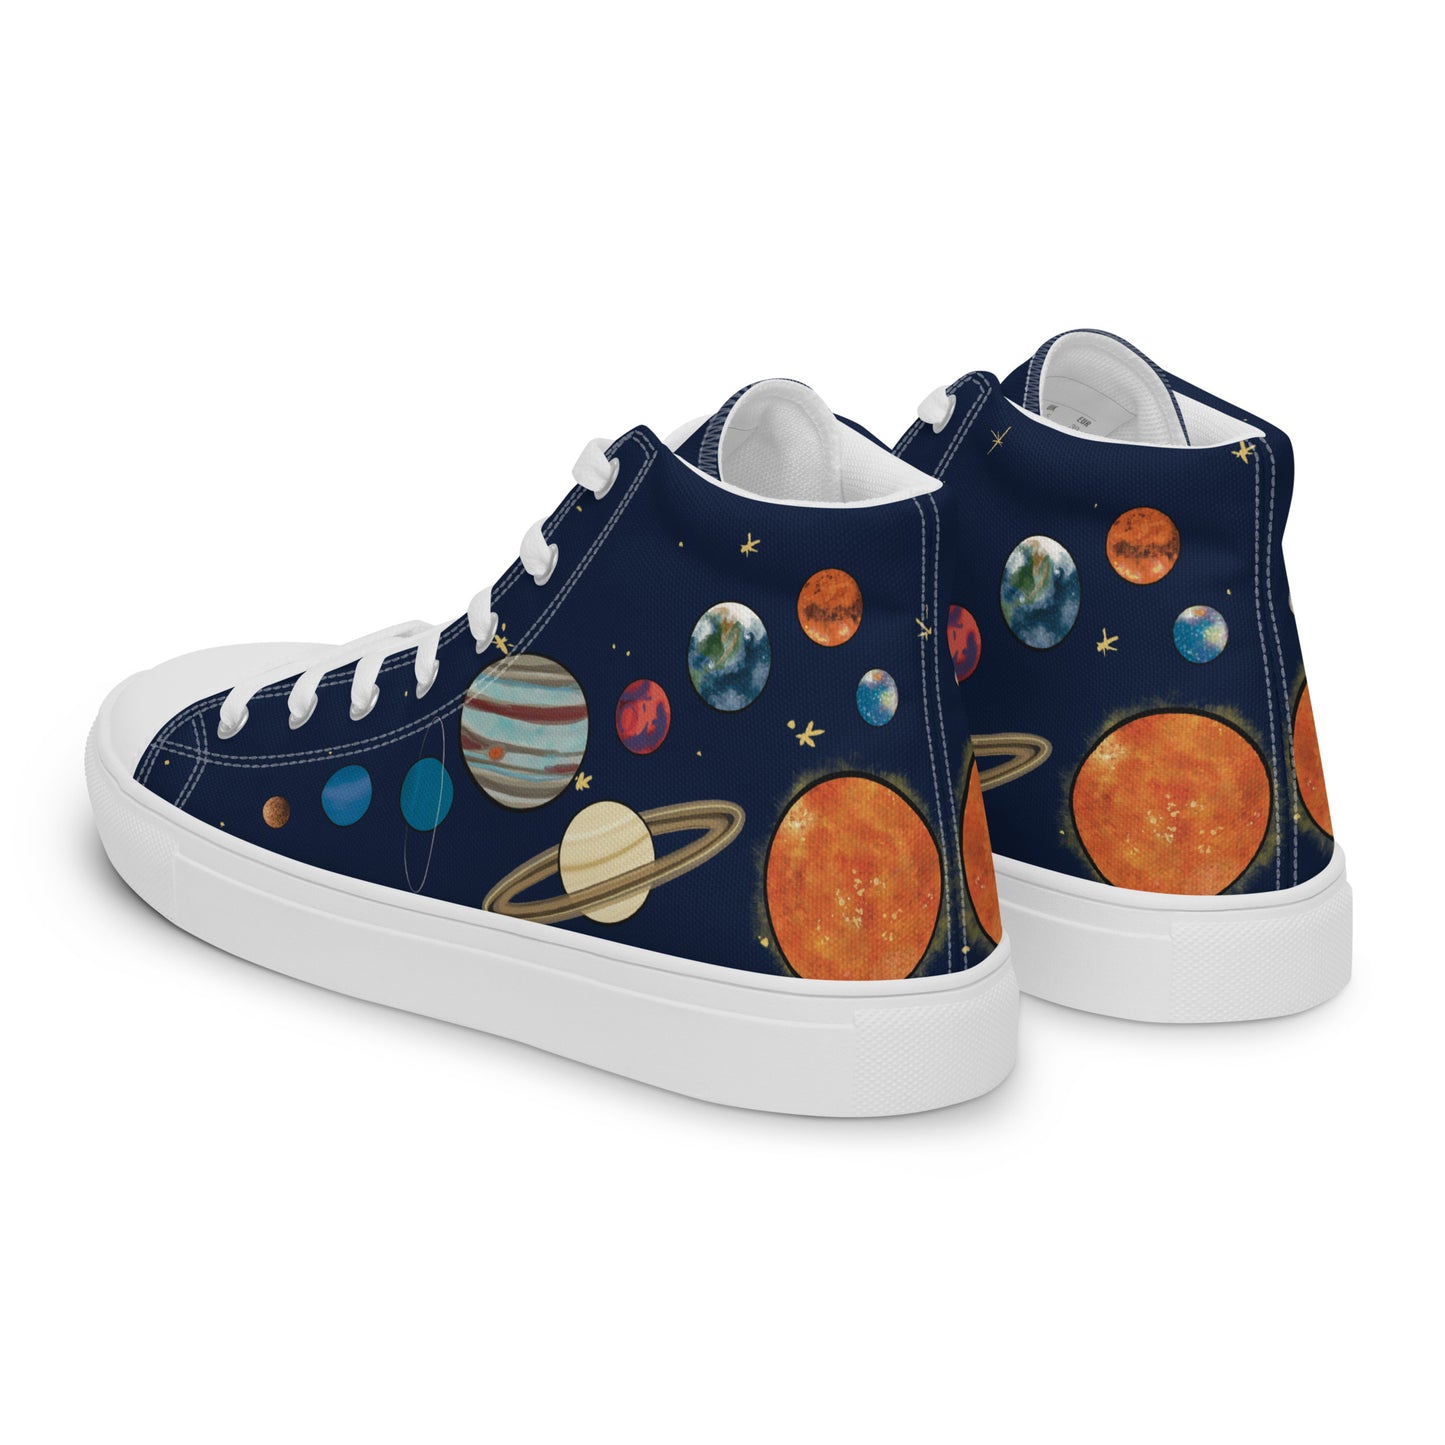 Left back view: A pair of high top shoes with painted solar system and starry background with white laces.